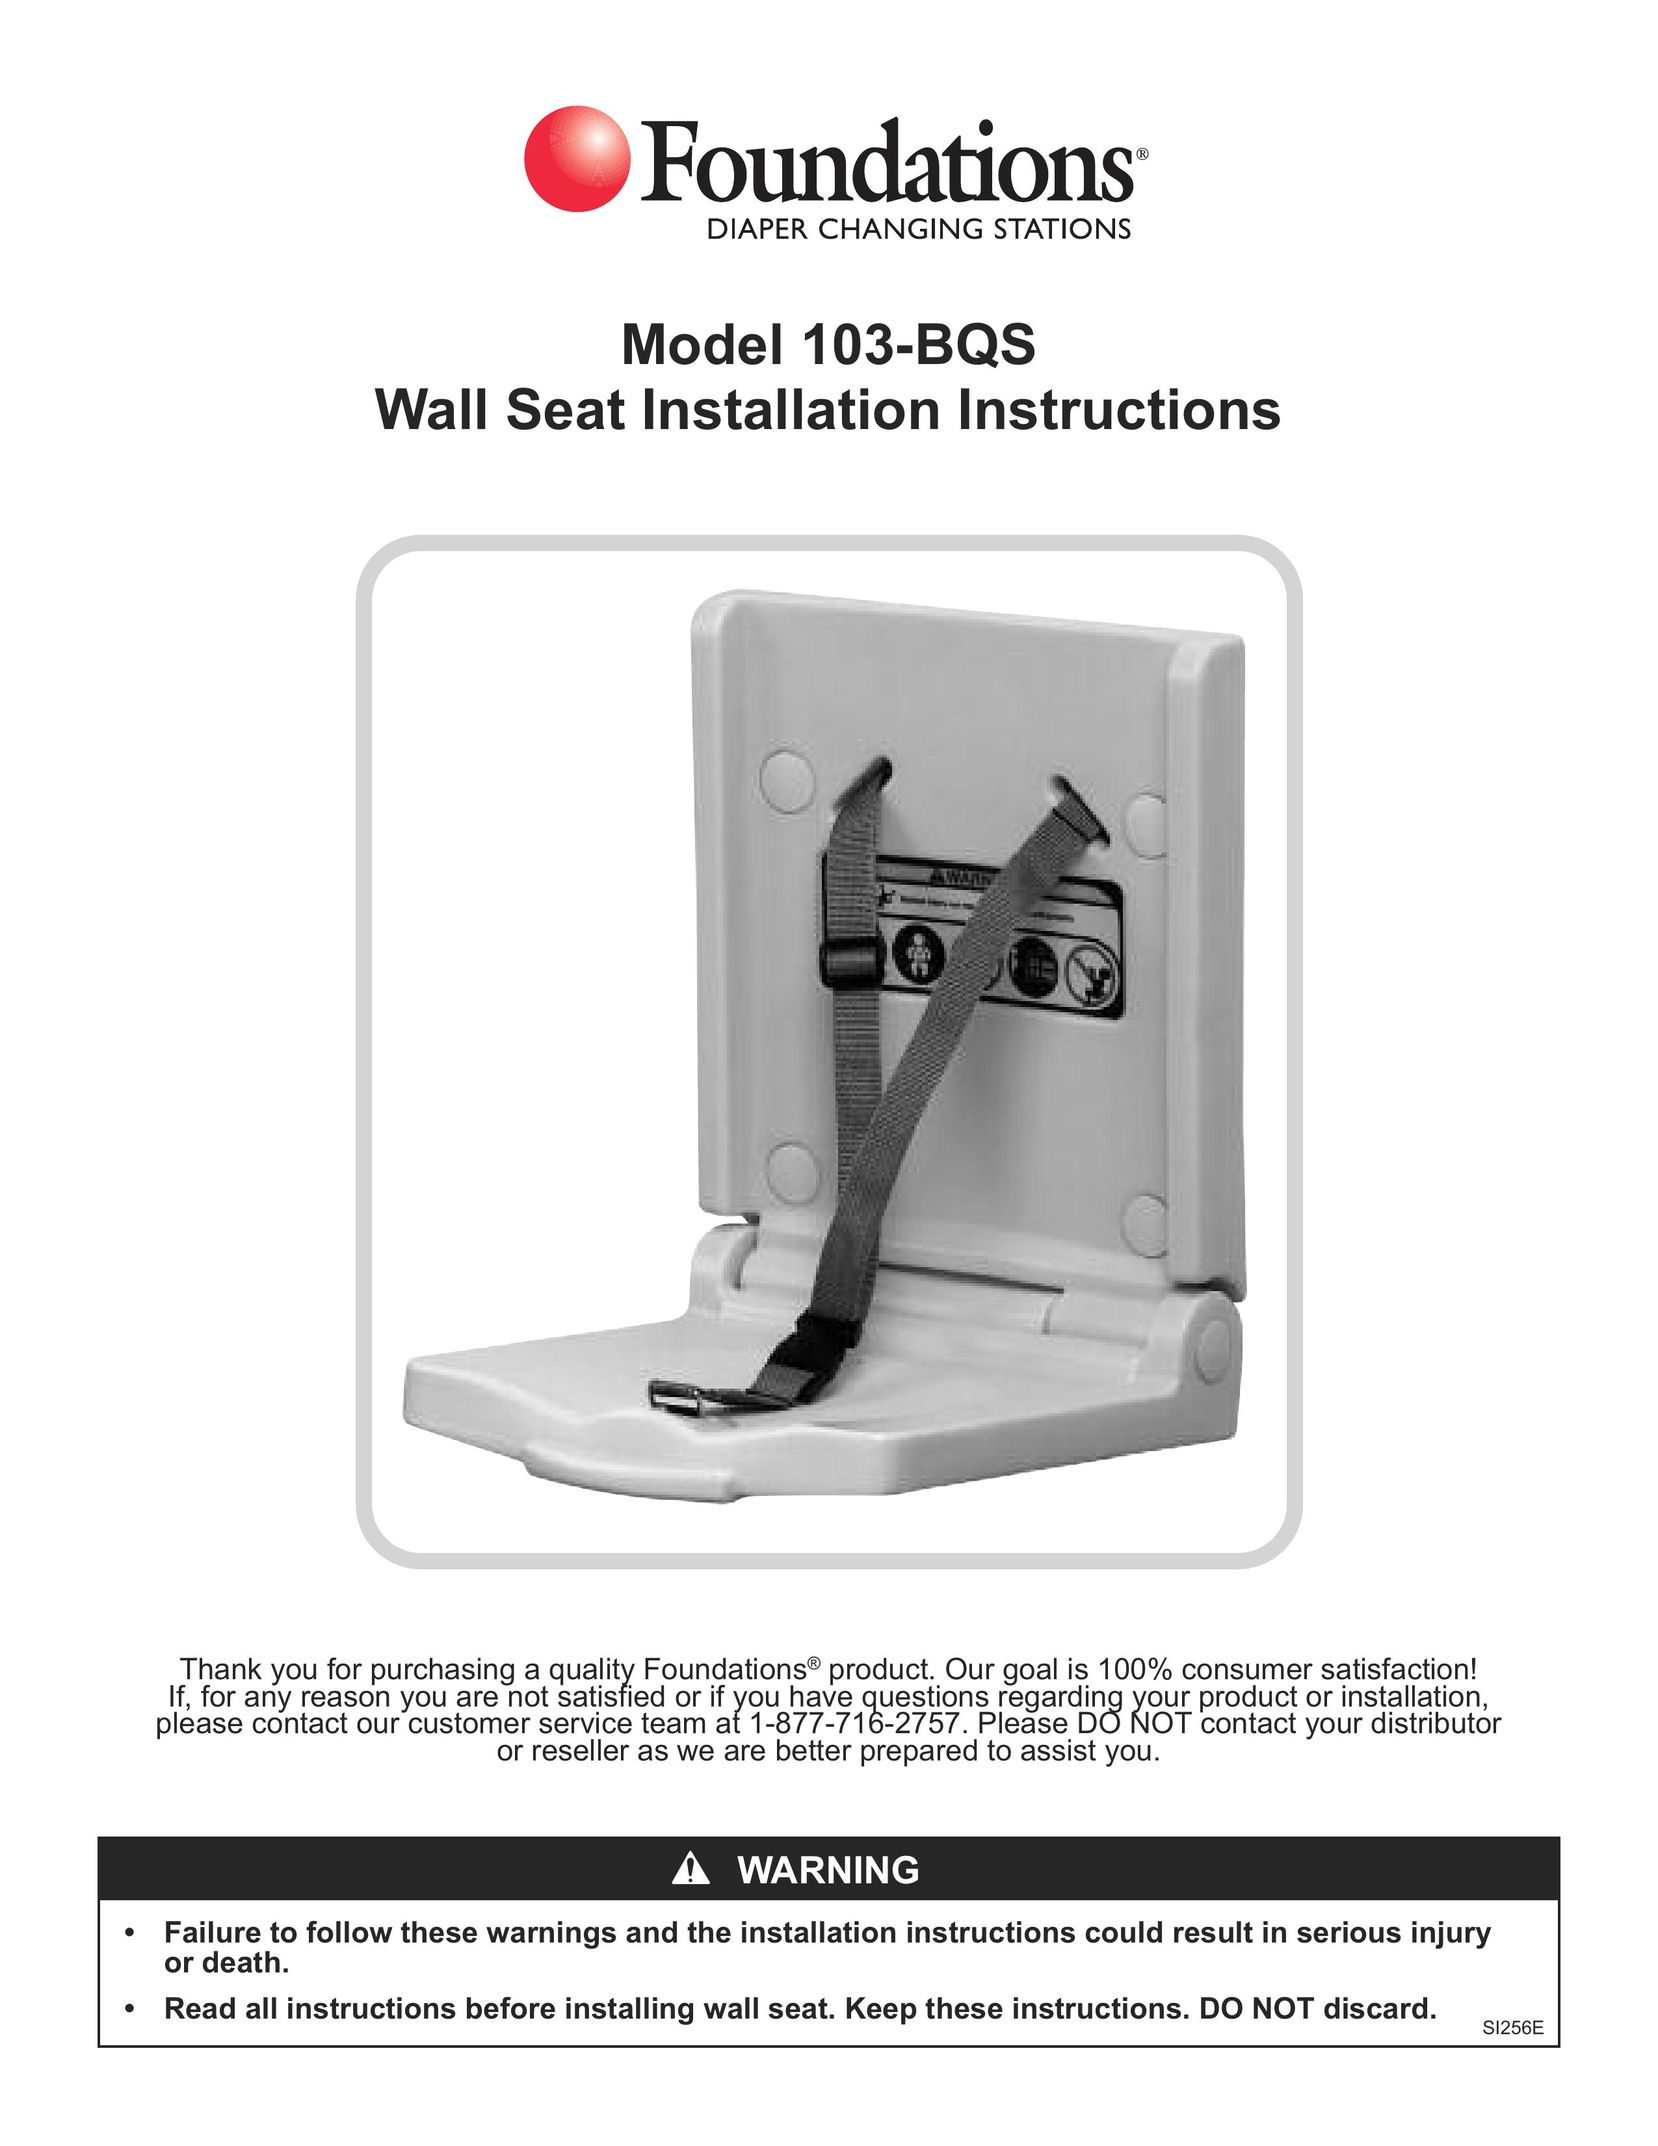 Foundations 103-BQS Baby Furniture User Manual (Page 1)